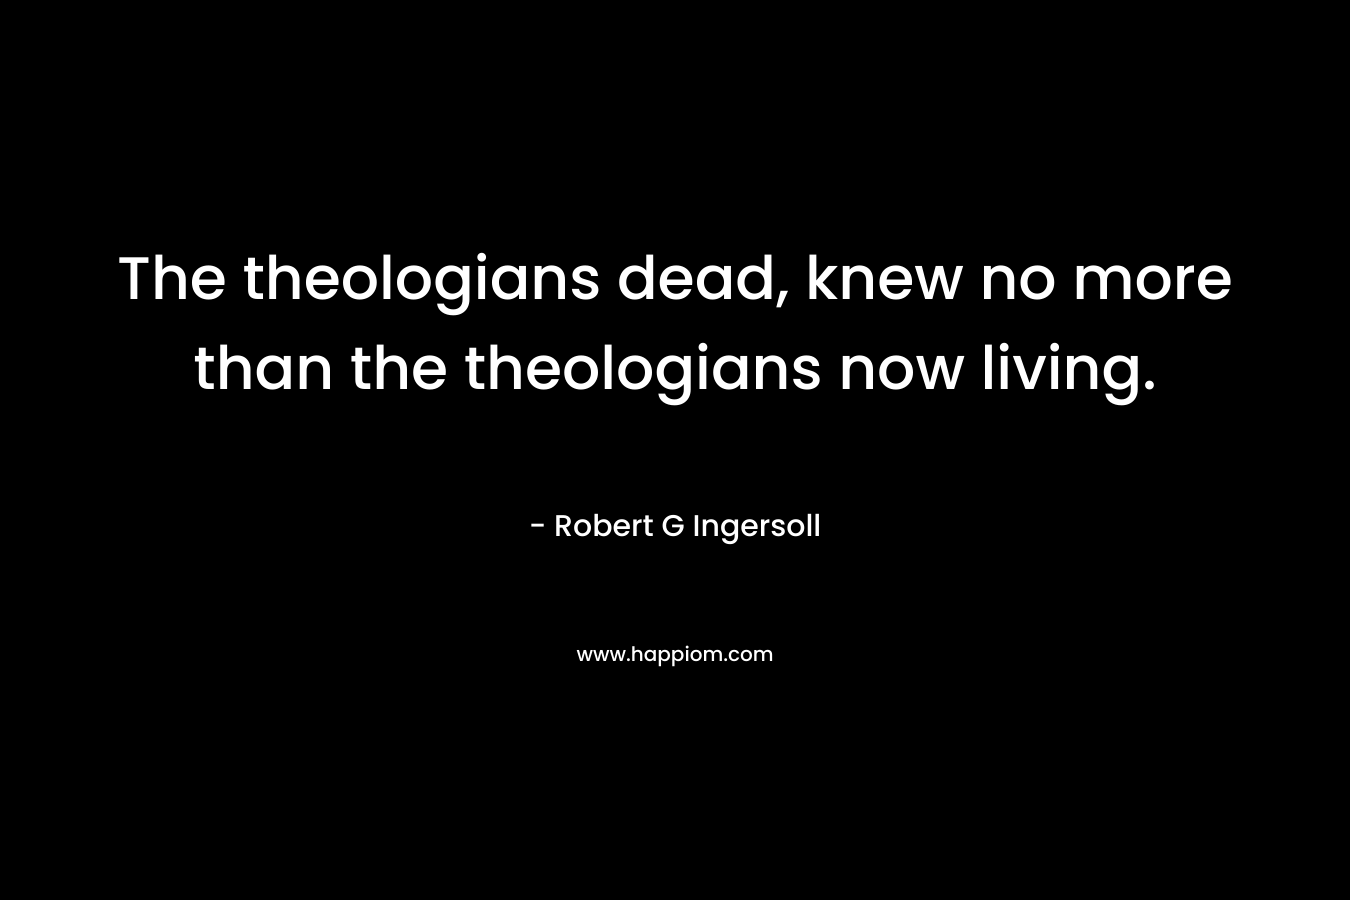 The theologians dead, knew no more than the theologians now living.